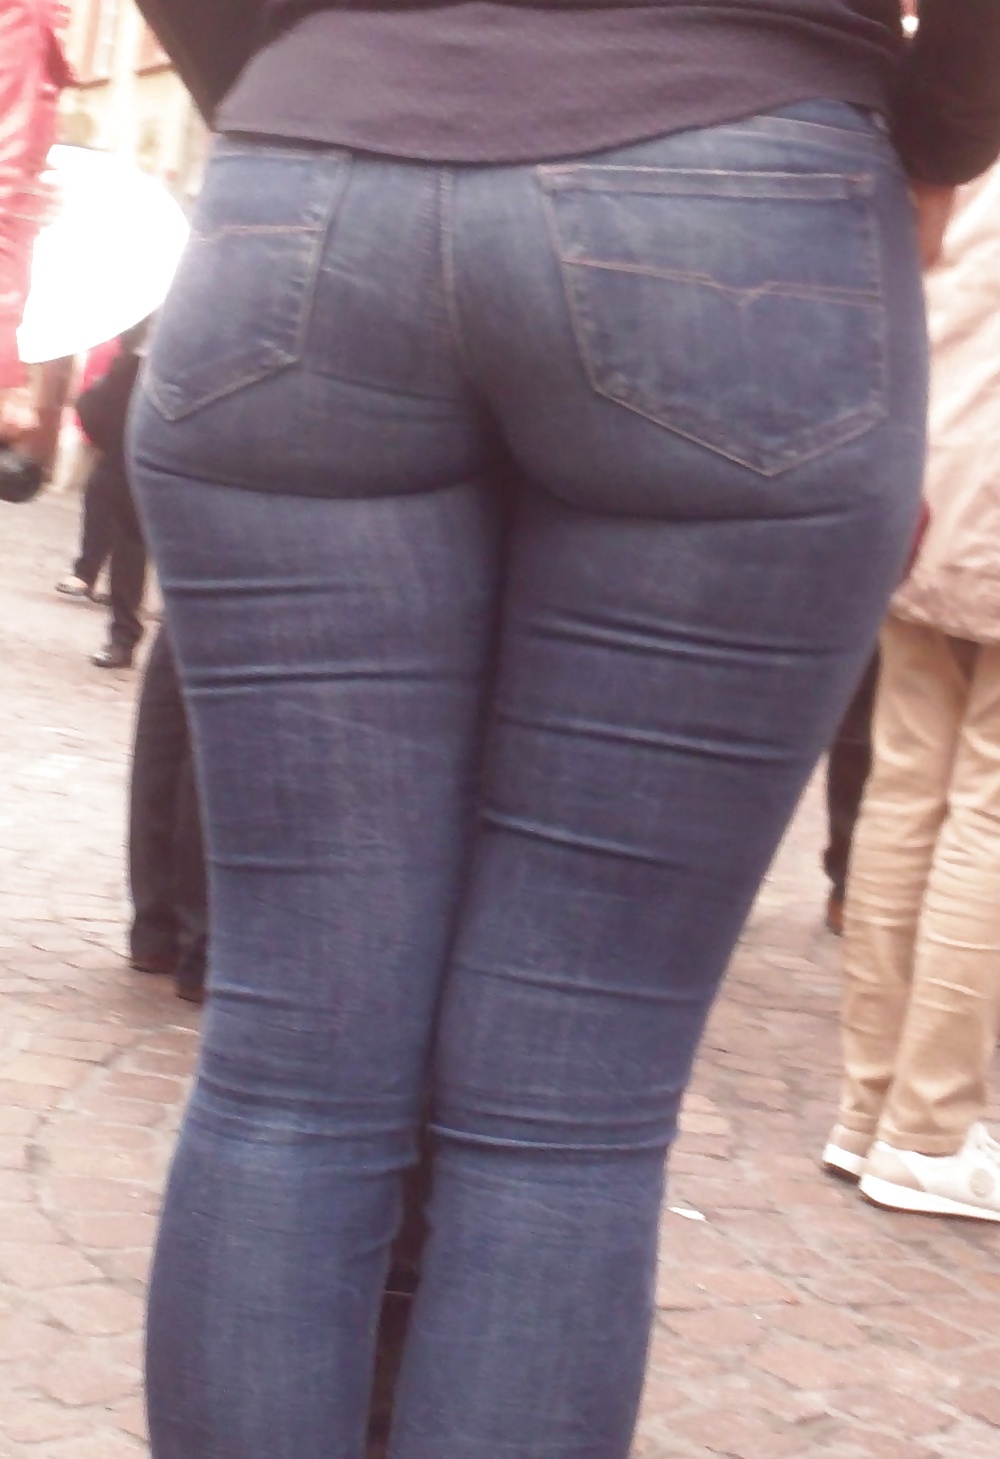 Nice big juicy teen ass & butt in very tight blue jeans  #31832226